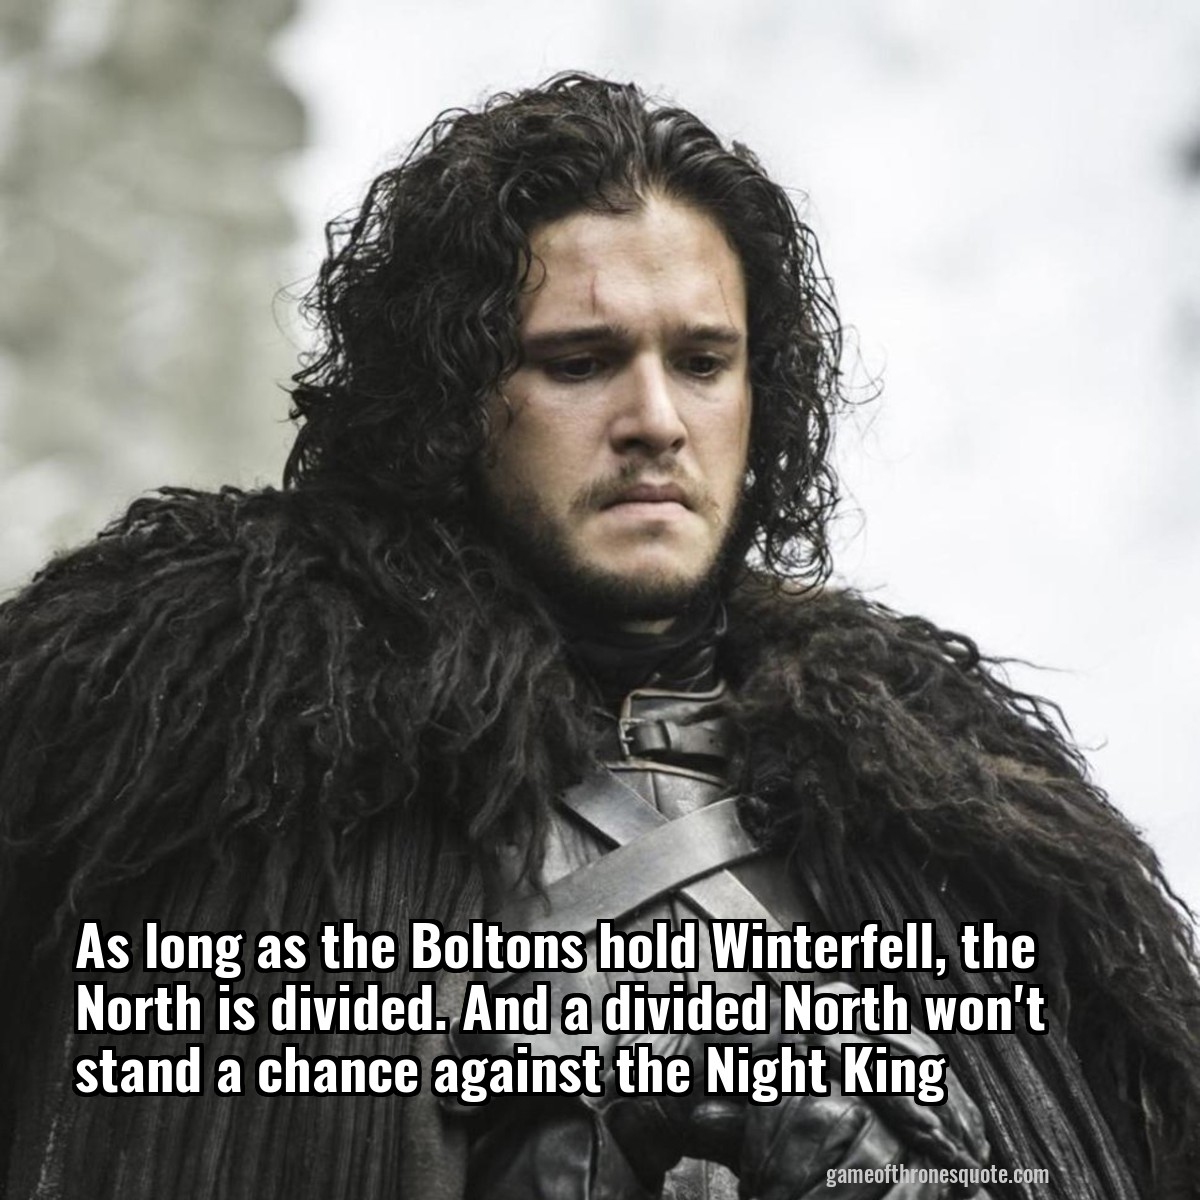 As long as the Boltons hold Winterfell, the North is divided. And a divided North won't stand a chance against the Night King